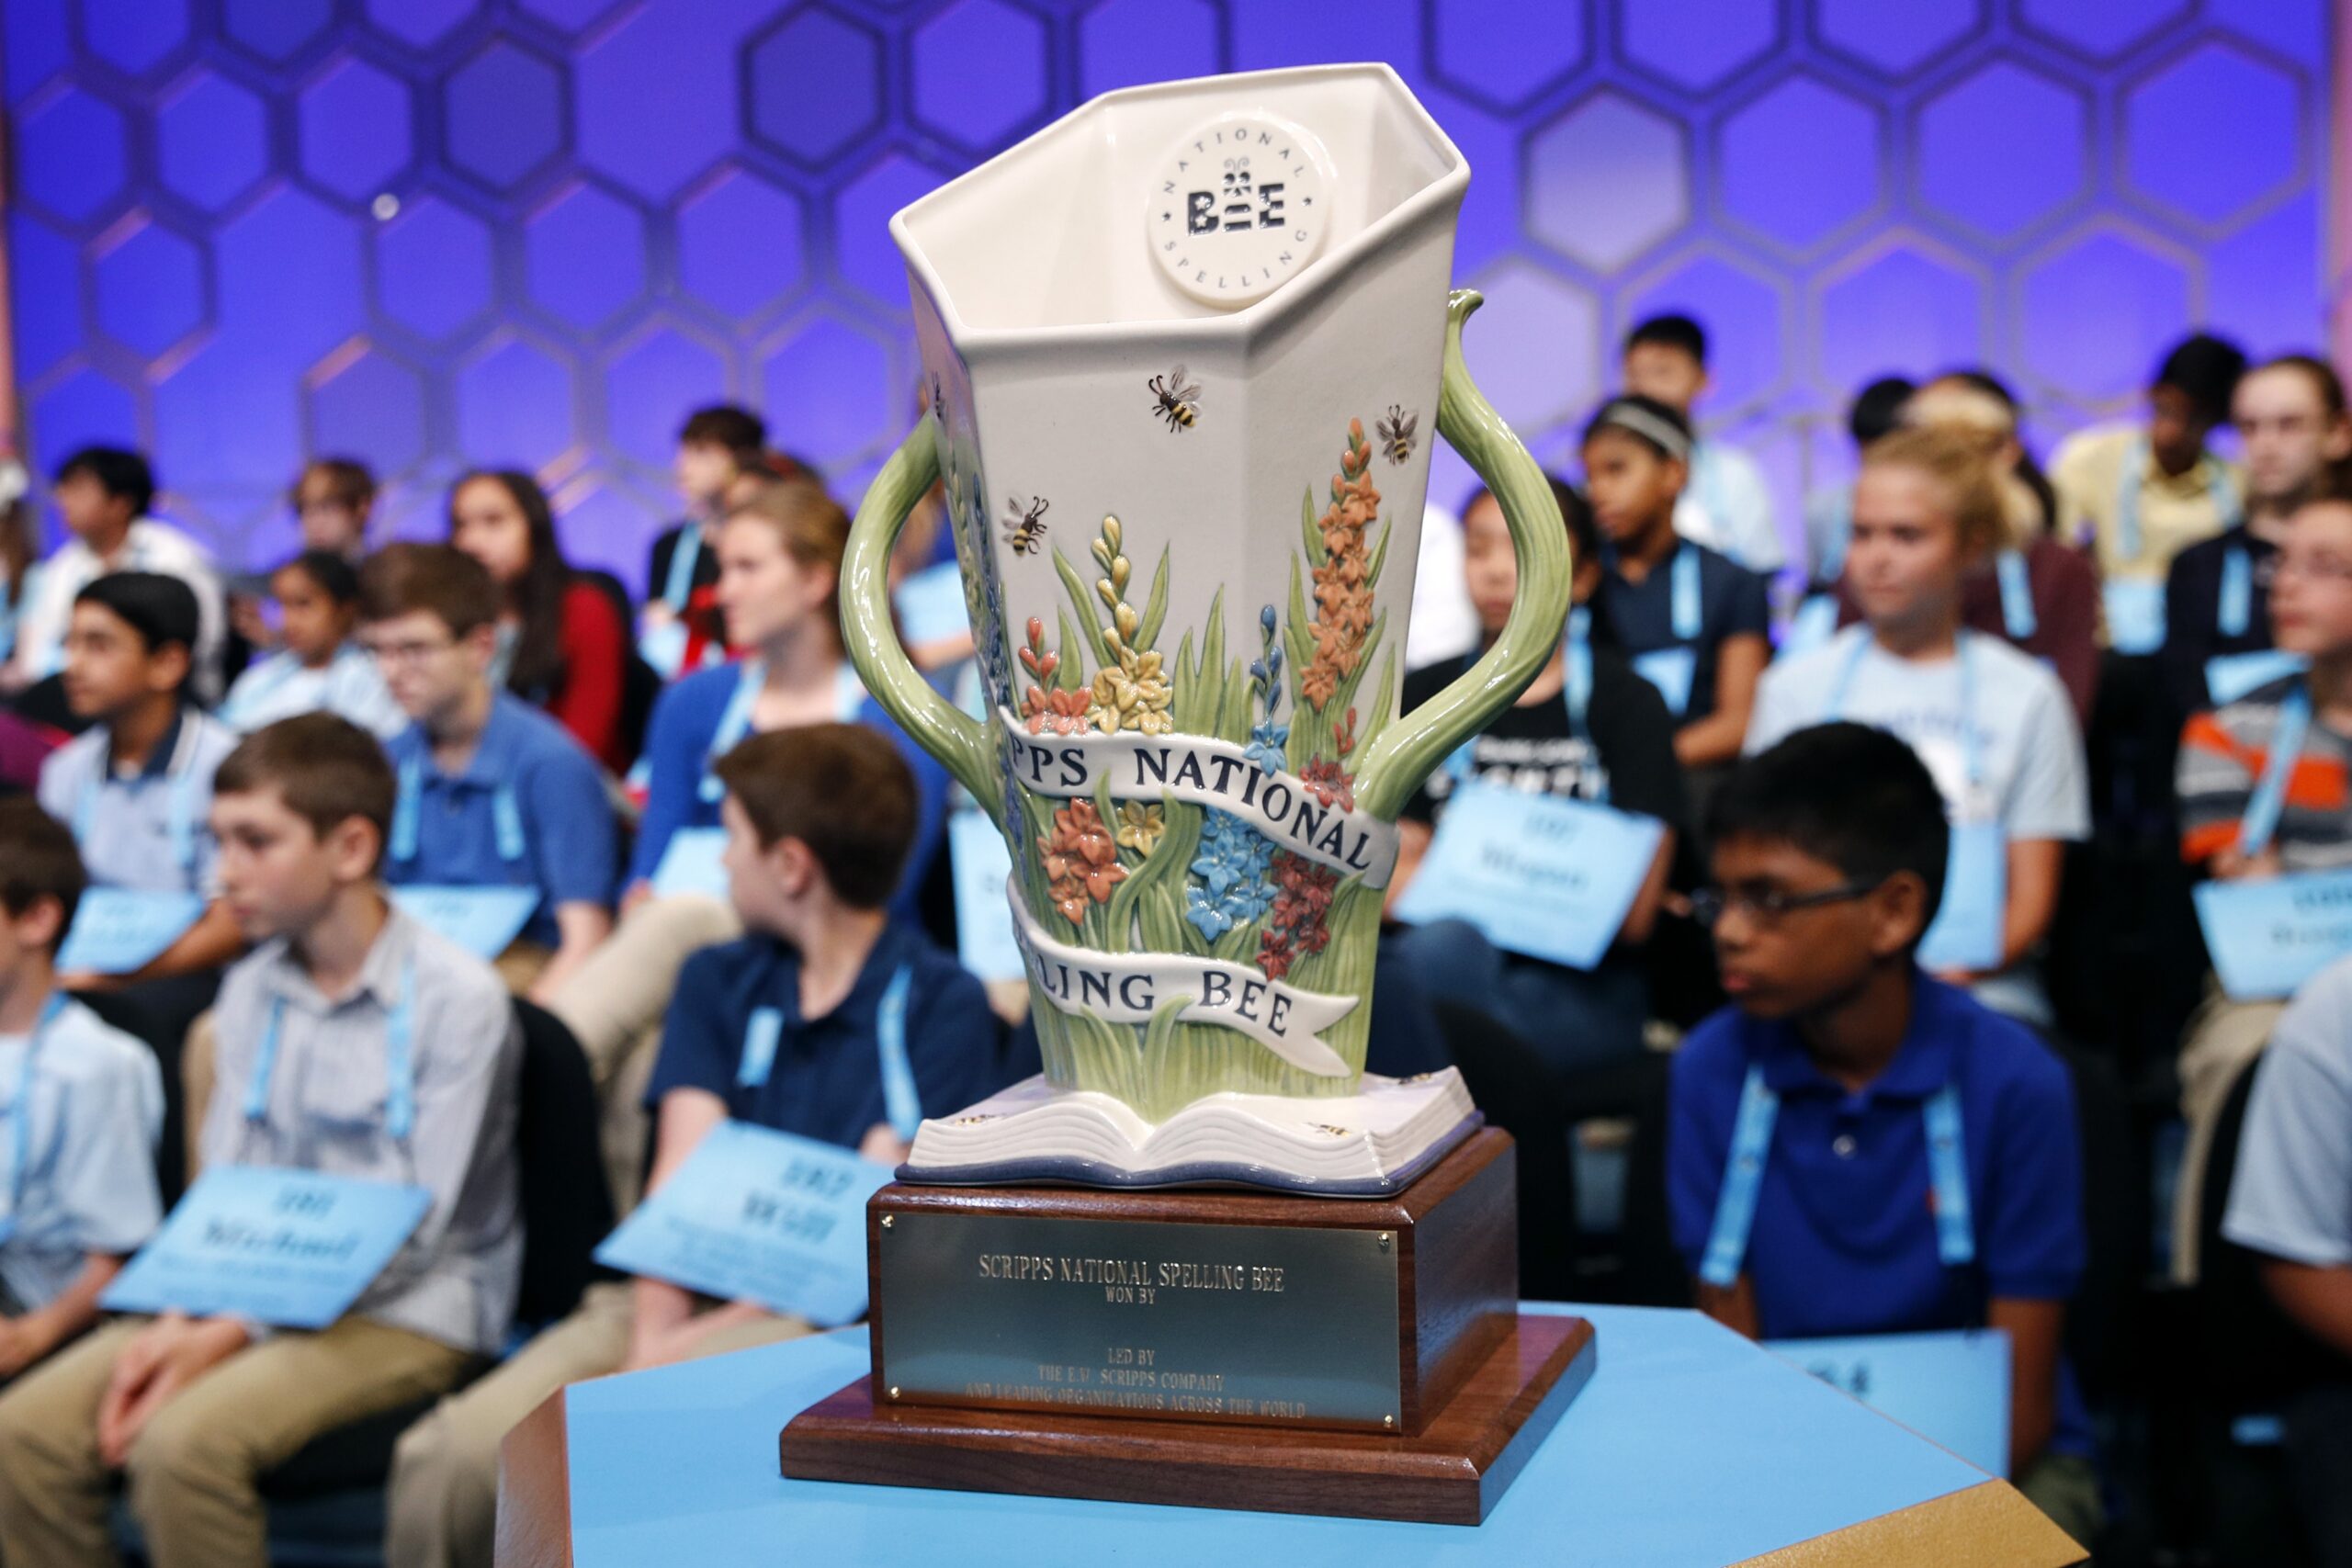 The Scripps National Spelling Bee trophy sits in front of competitors